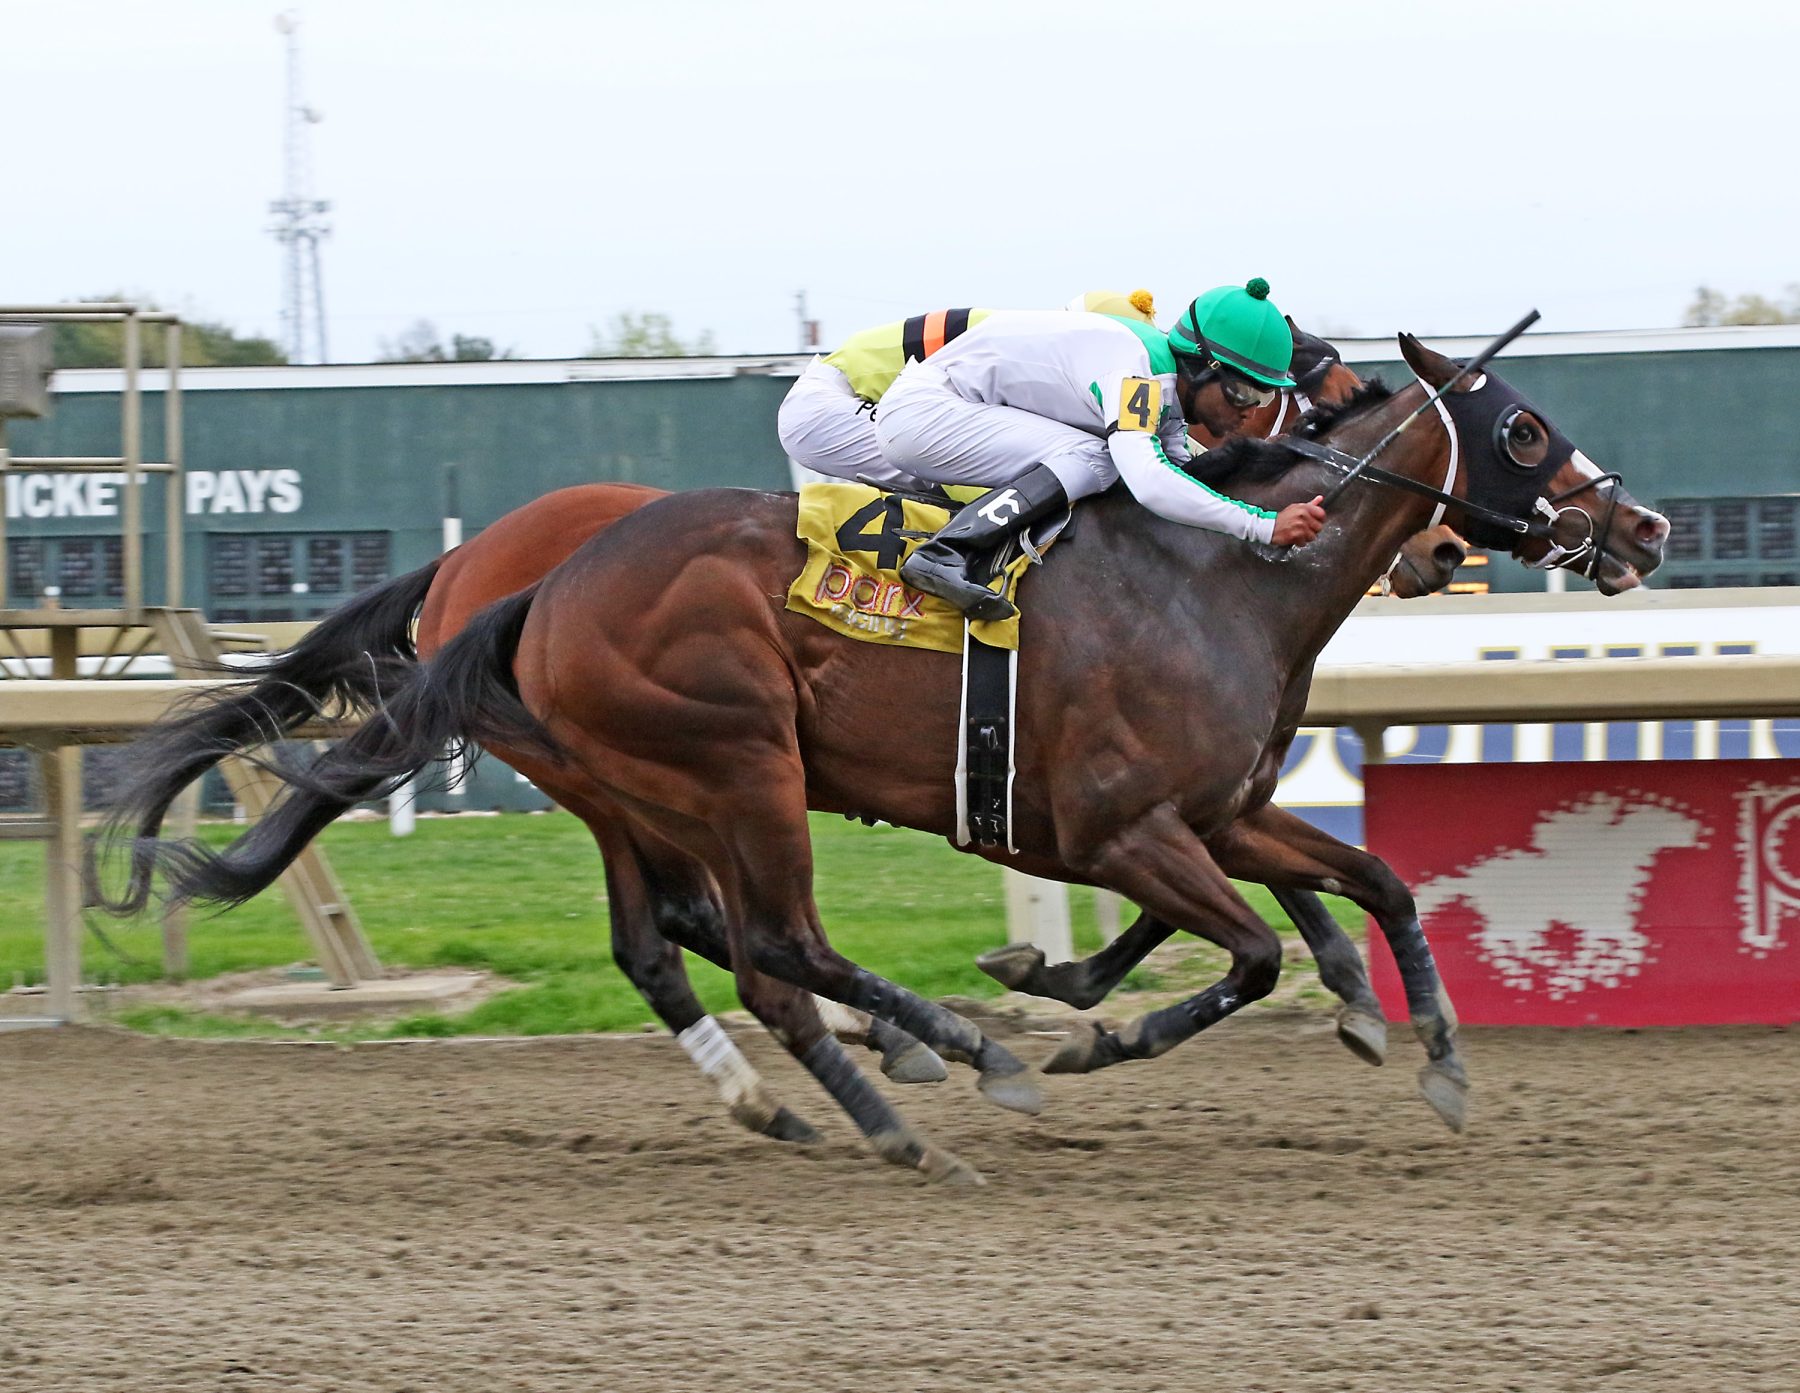 Fortheluvofbourbon #4 ridden by Kendrick Carmouche battles to the wire in the $100,000 Page McKenney Handicap at Parx Racing in Bensalem, PA on April 25, 2022. Finishing second was Beren #2. Fortheluvofbourbon is trained by Michael Pino for Smart Angle LLP. Photo by Barbara Weidl/EQUI-PHOTO.